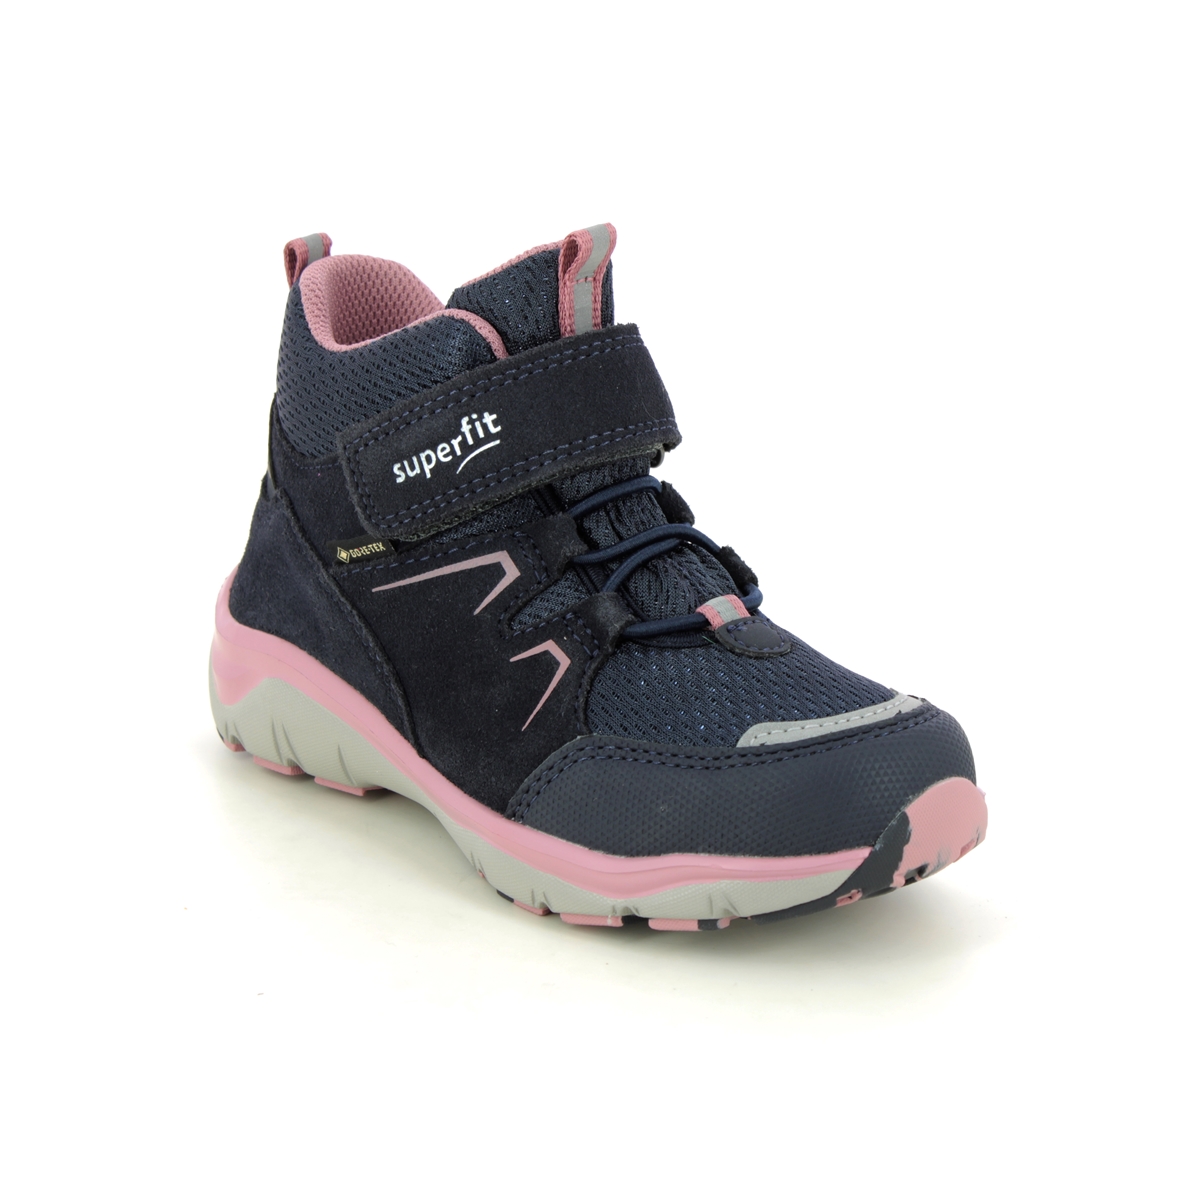 Superfit Sport5 Gore Tex Navy Pink Kids Girls Boots 1000243-8010 In Size 31 In Plain Navy Pink For kids